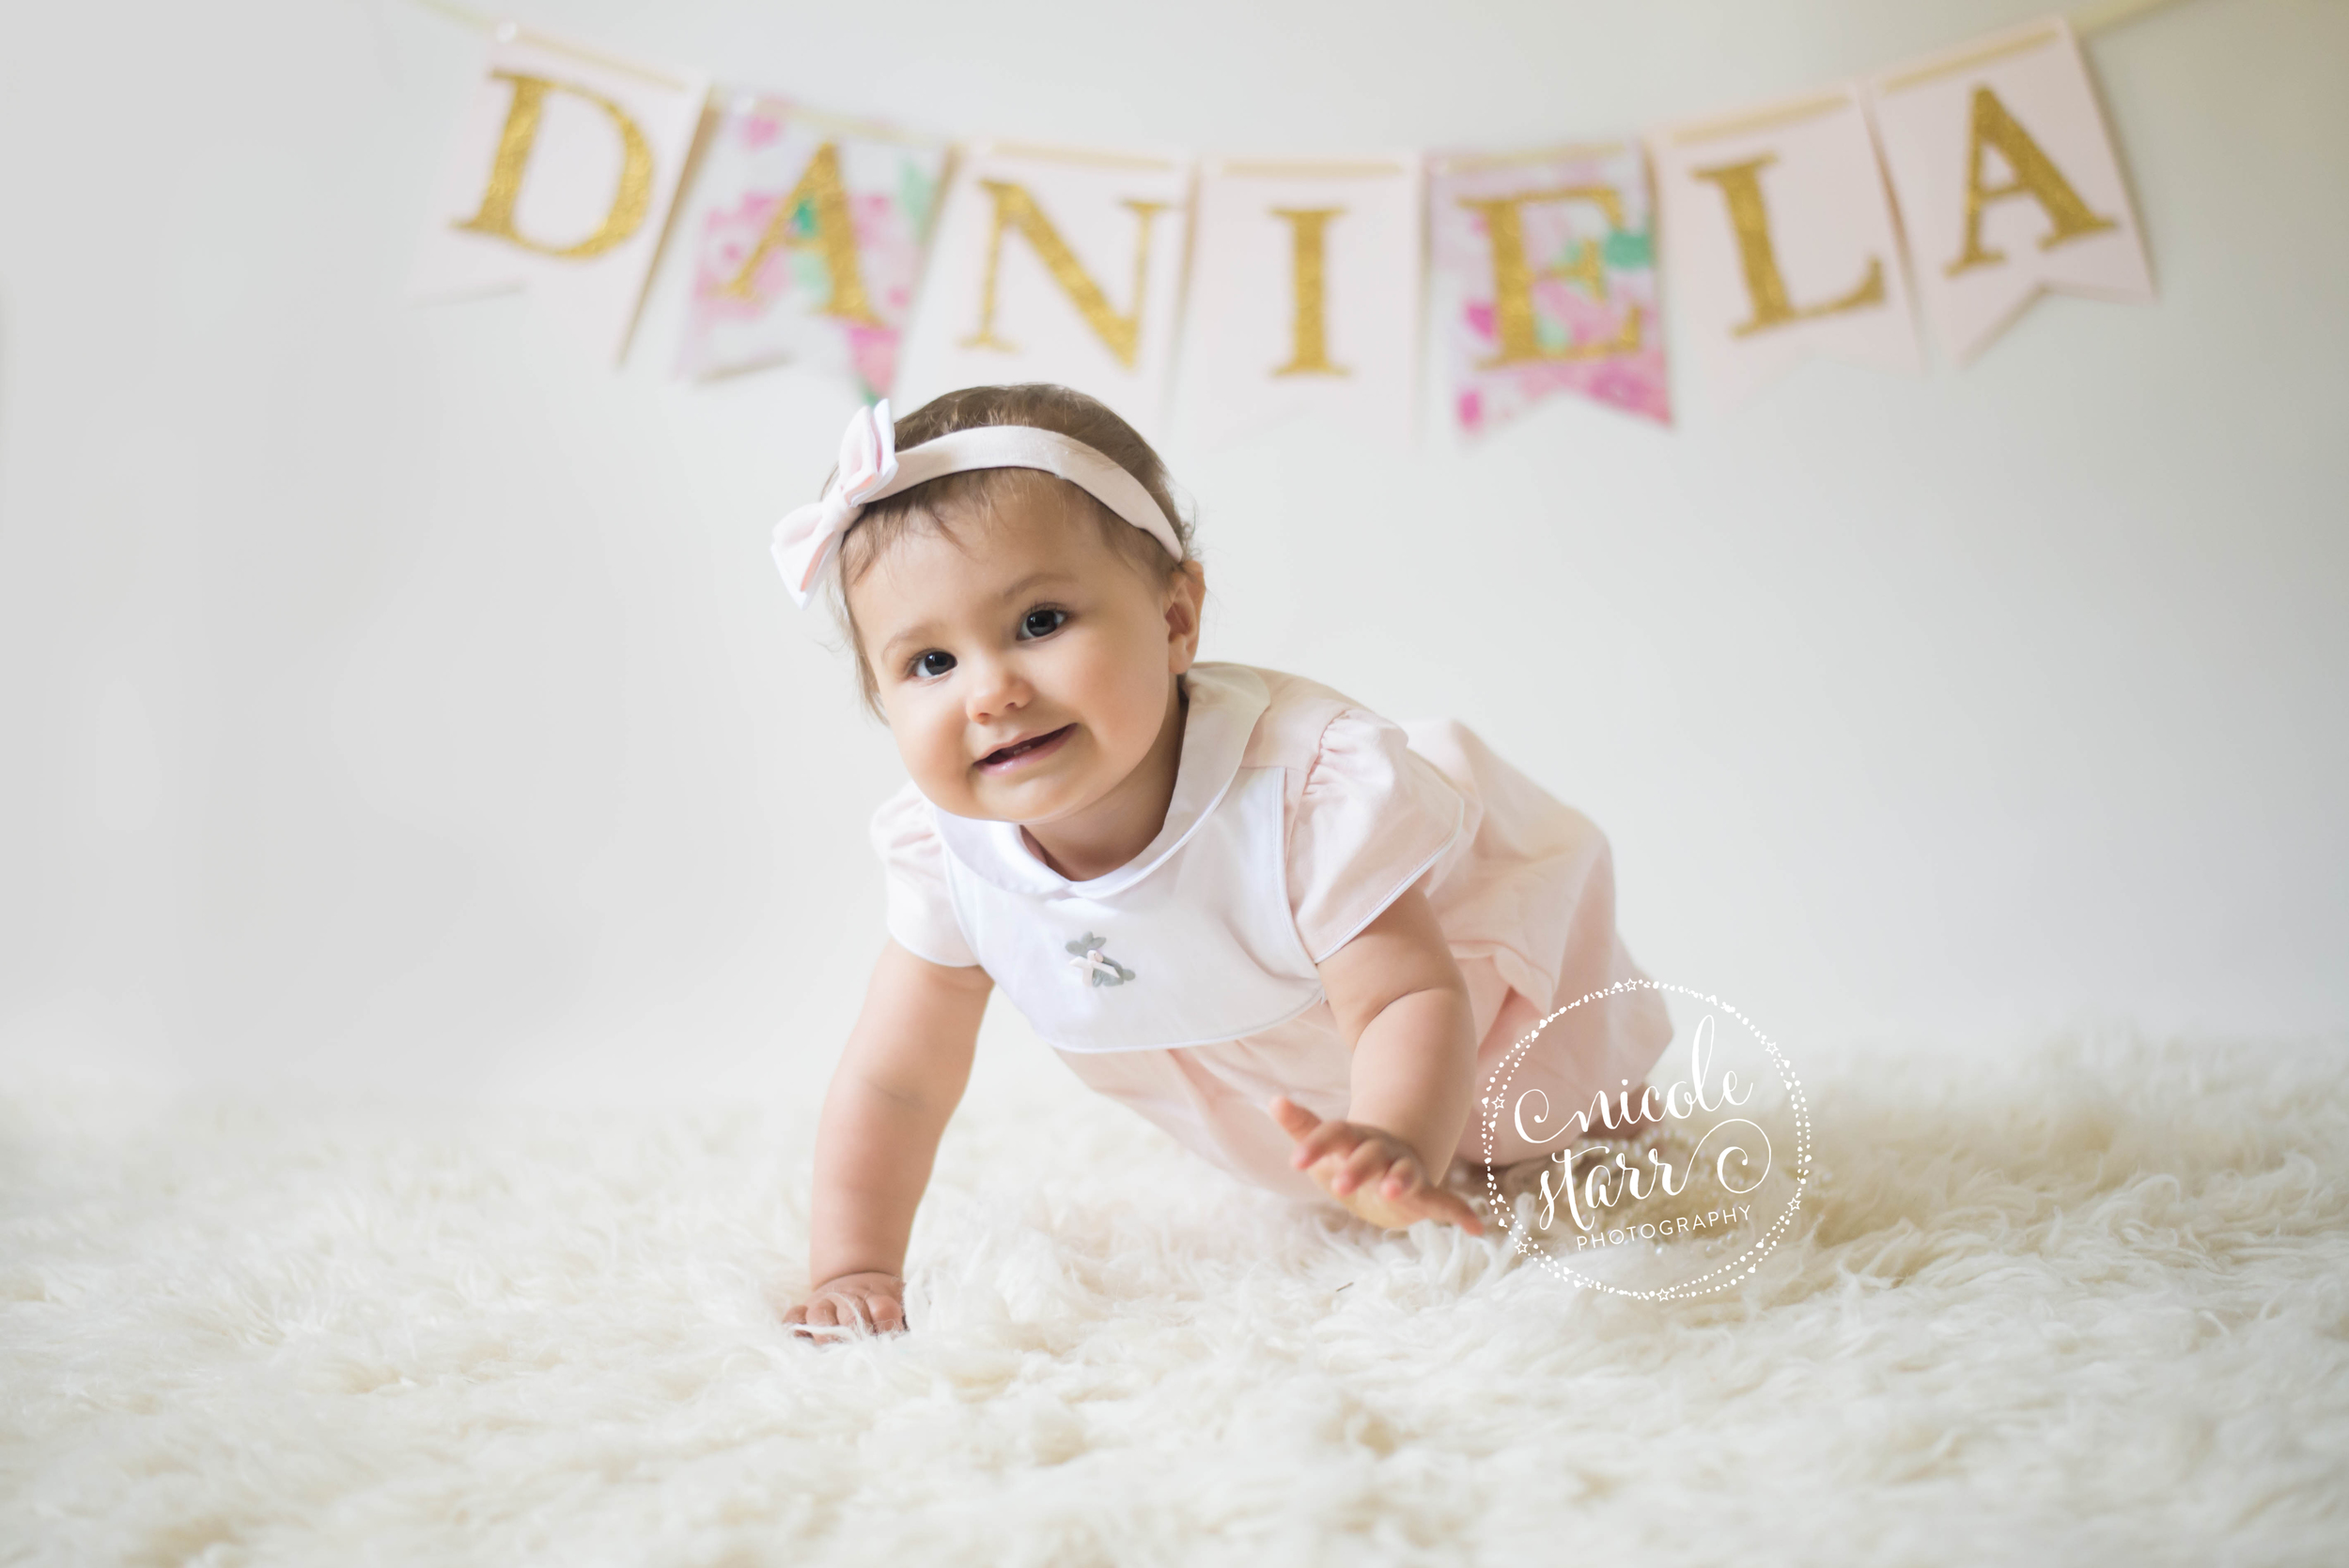 simple and classic baby photos and name banner